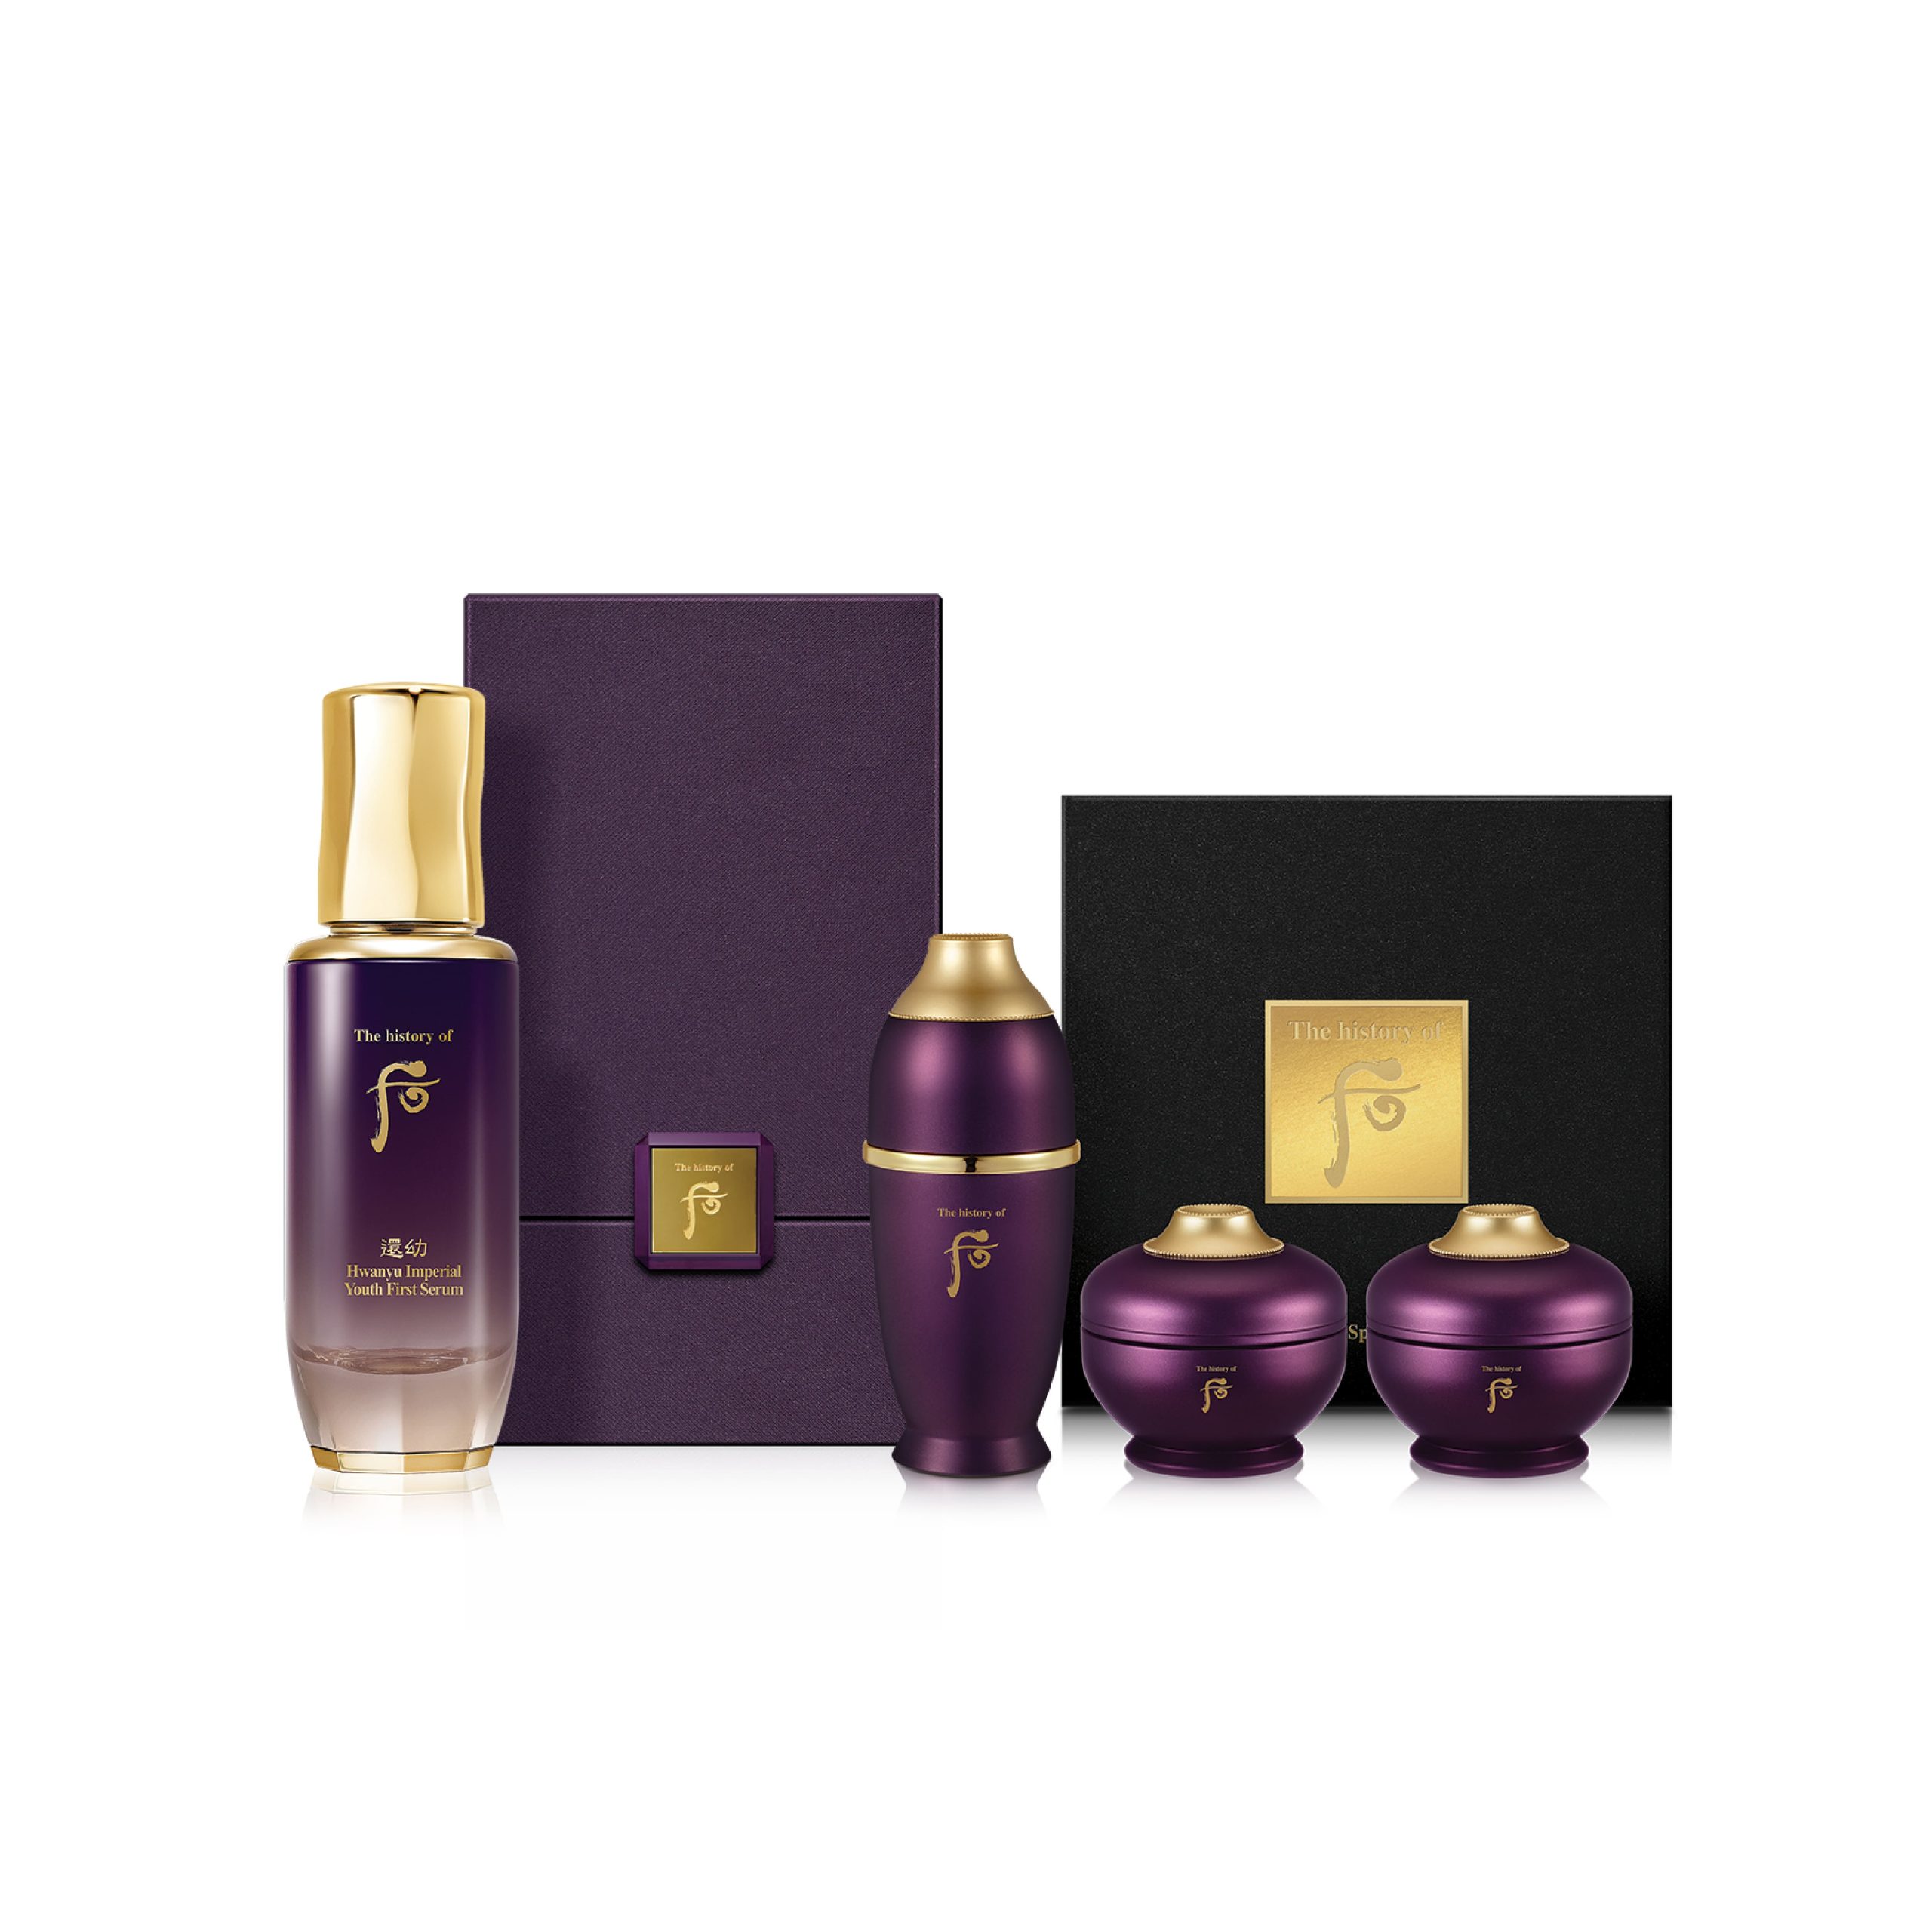 Hwanyu Imperial Youth First Ritual Serum Special Set